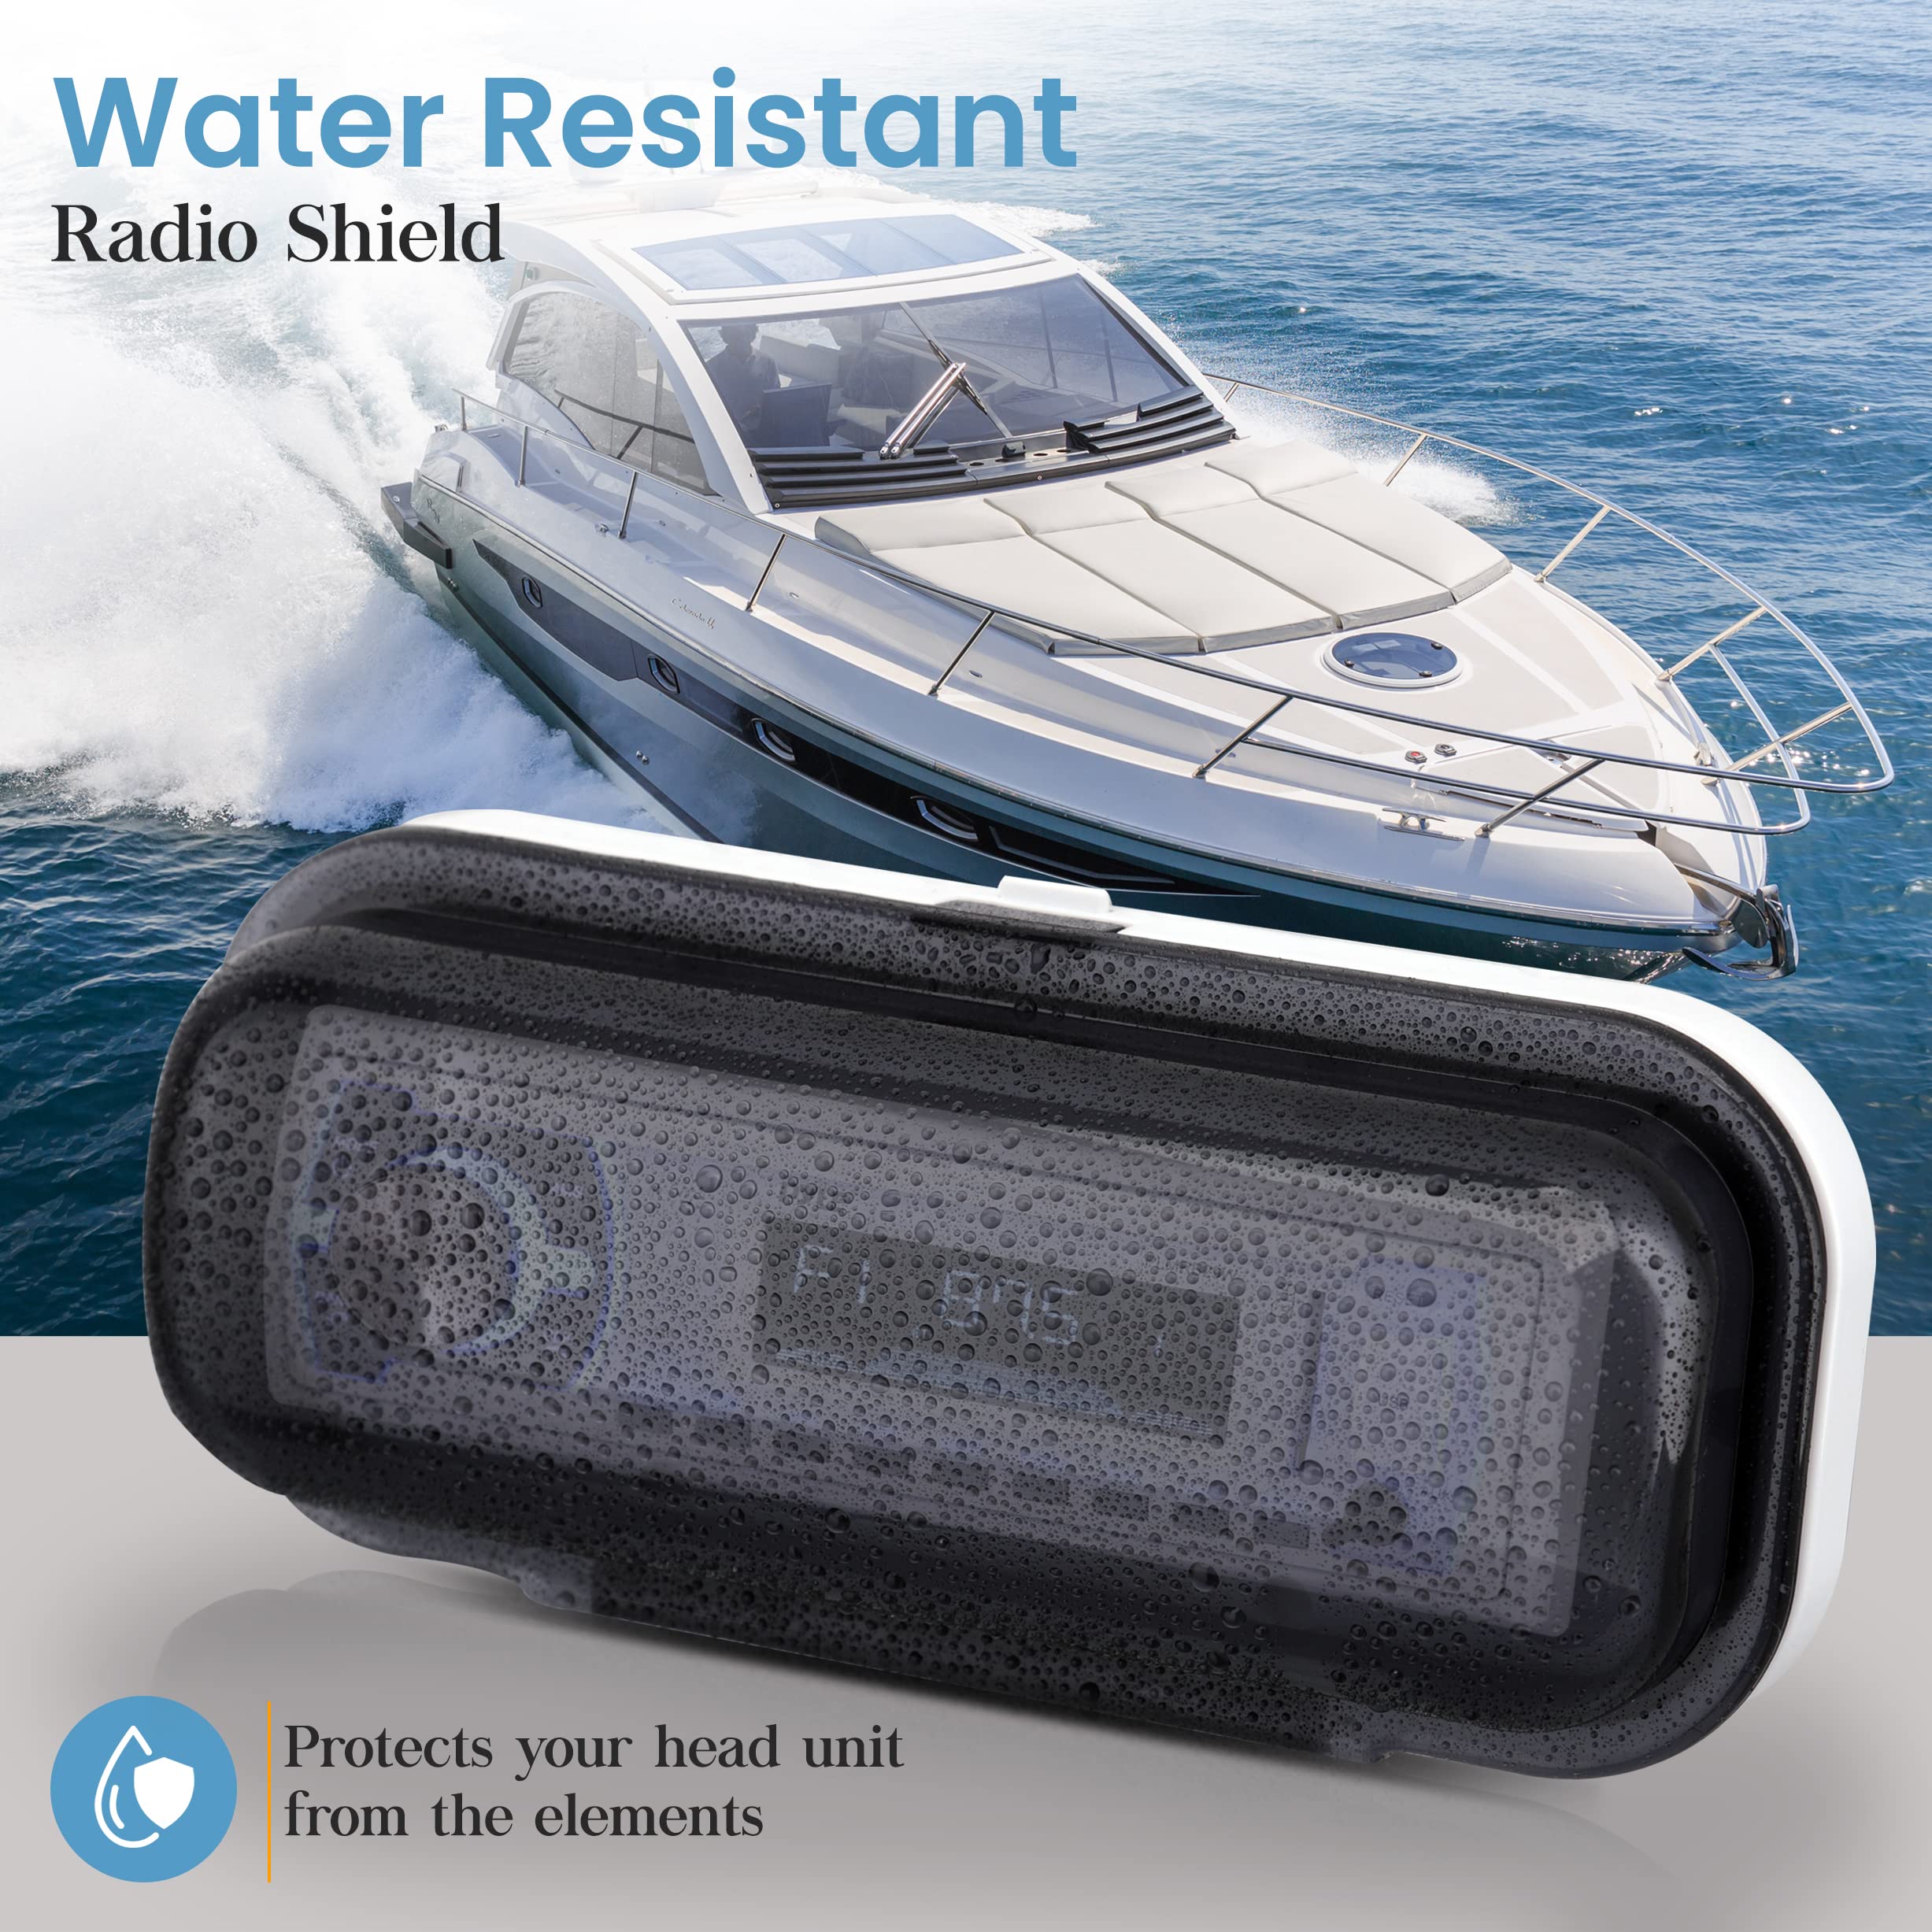 Pyle Water Resistant Marine Stereo Cover - Smoke Colored Heavy Duty Boat Radio Protector Shield with Flip-up Door & Spring Loaded Release - Mounting Gasket Included - Pyle PLMRCW1,White